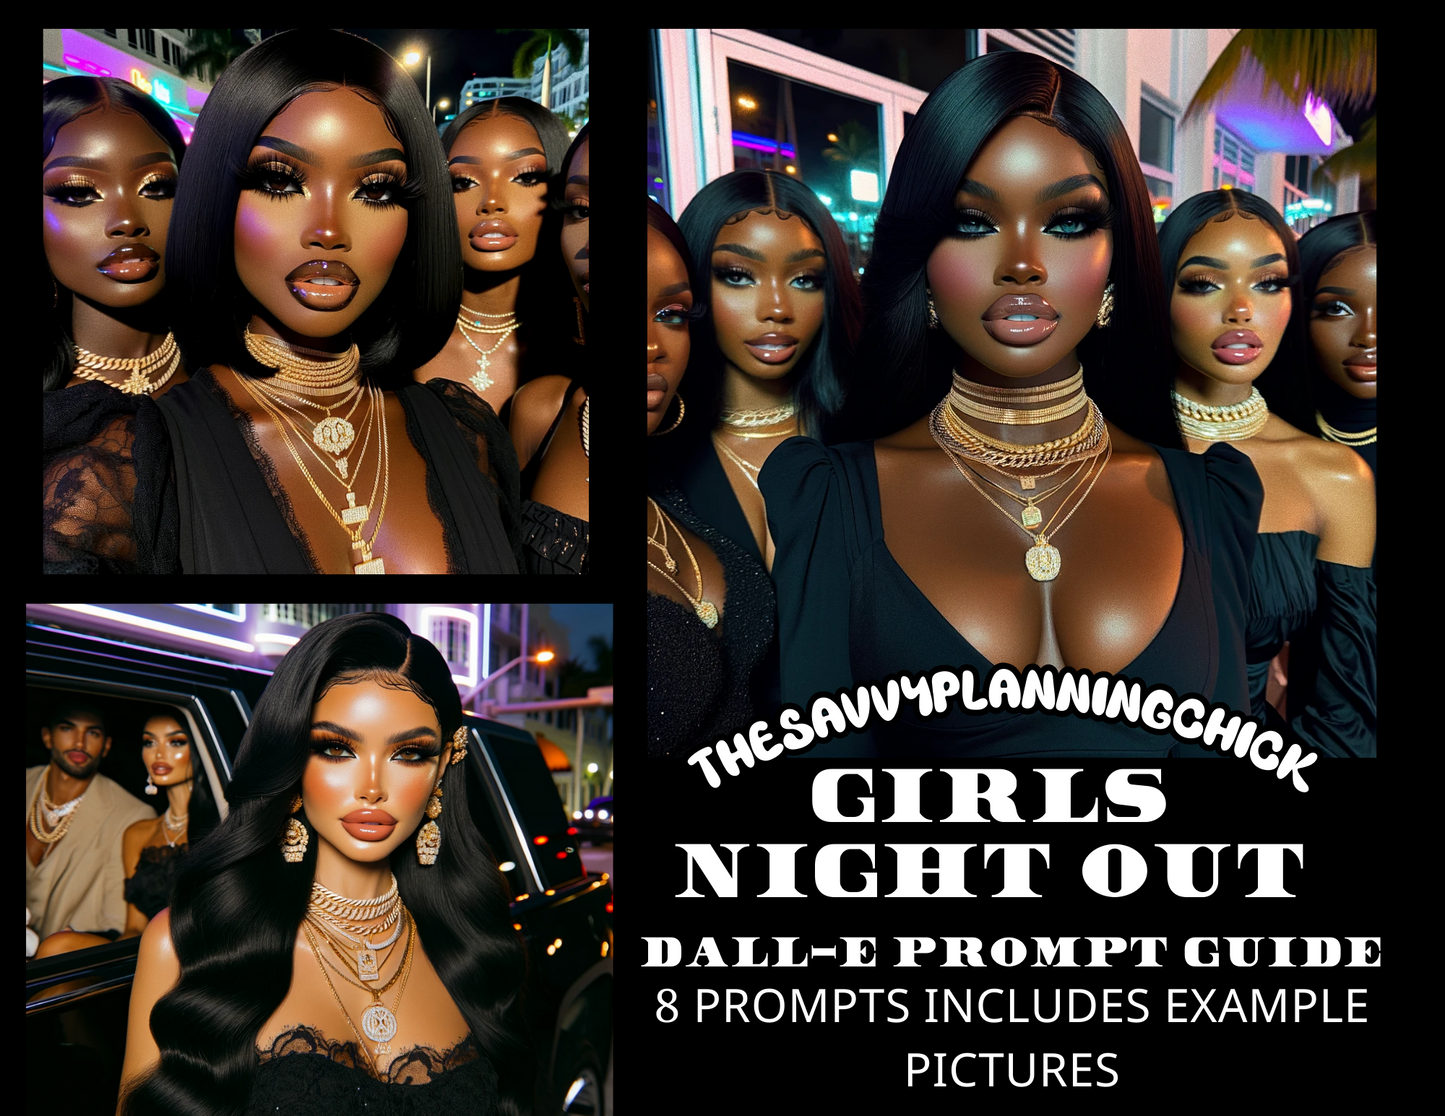 Girls Night Out DALL-E Prompt Guide